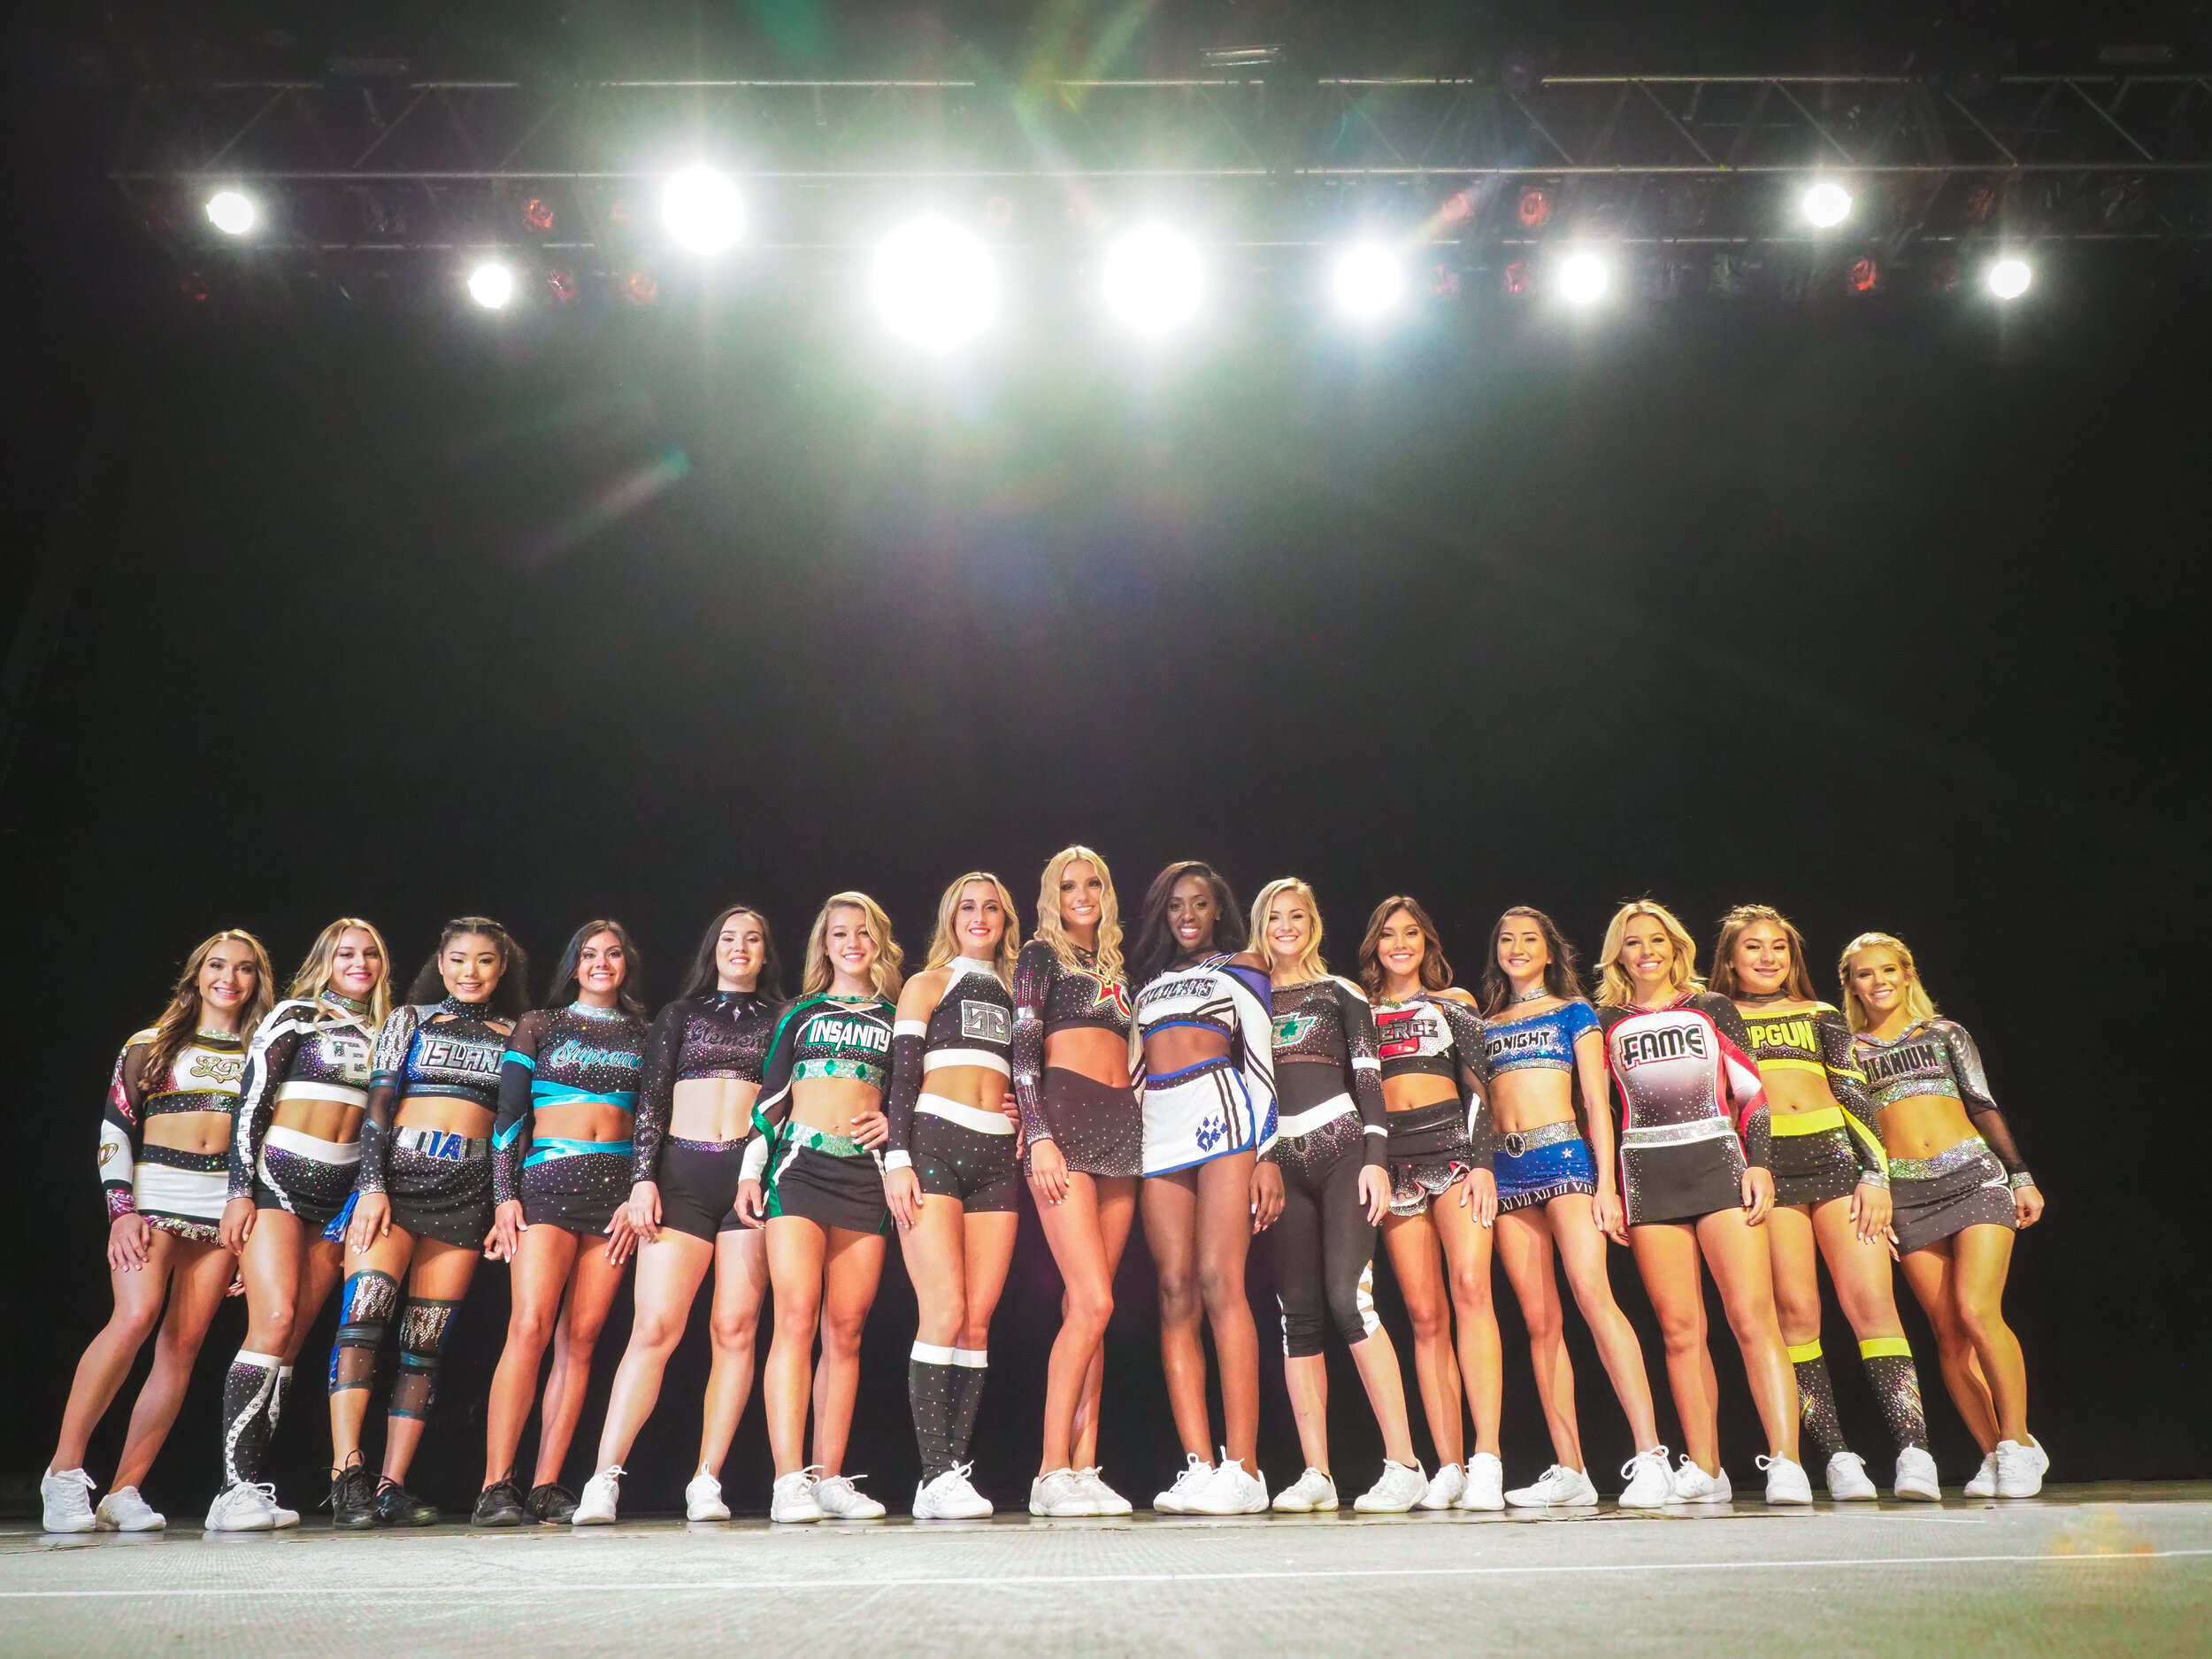 Why Choose Rebel Athletic for Your Cheerleading Gear & Uniforms